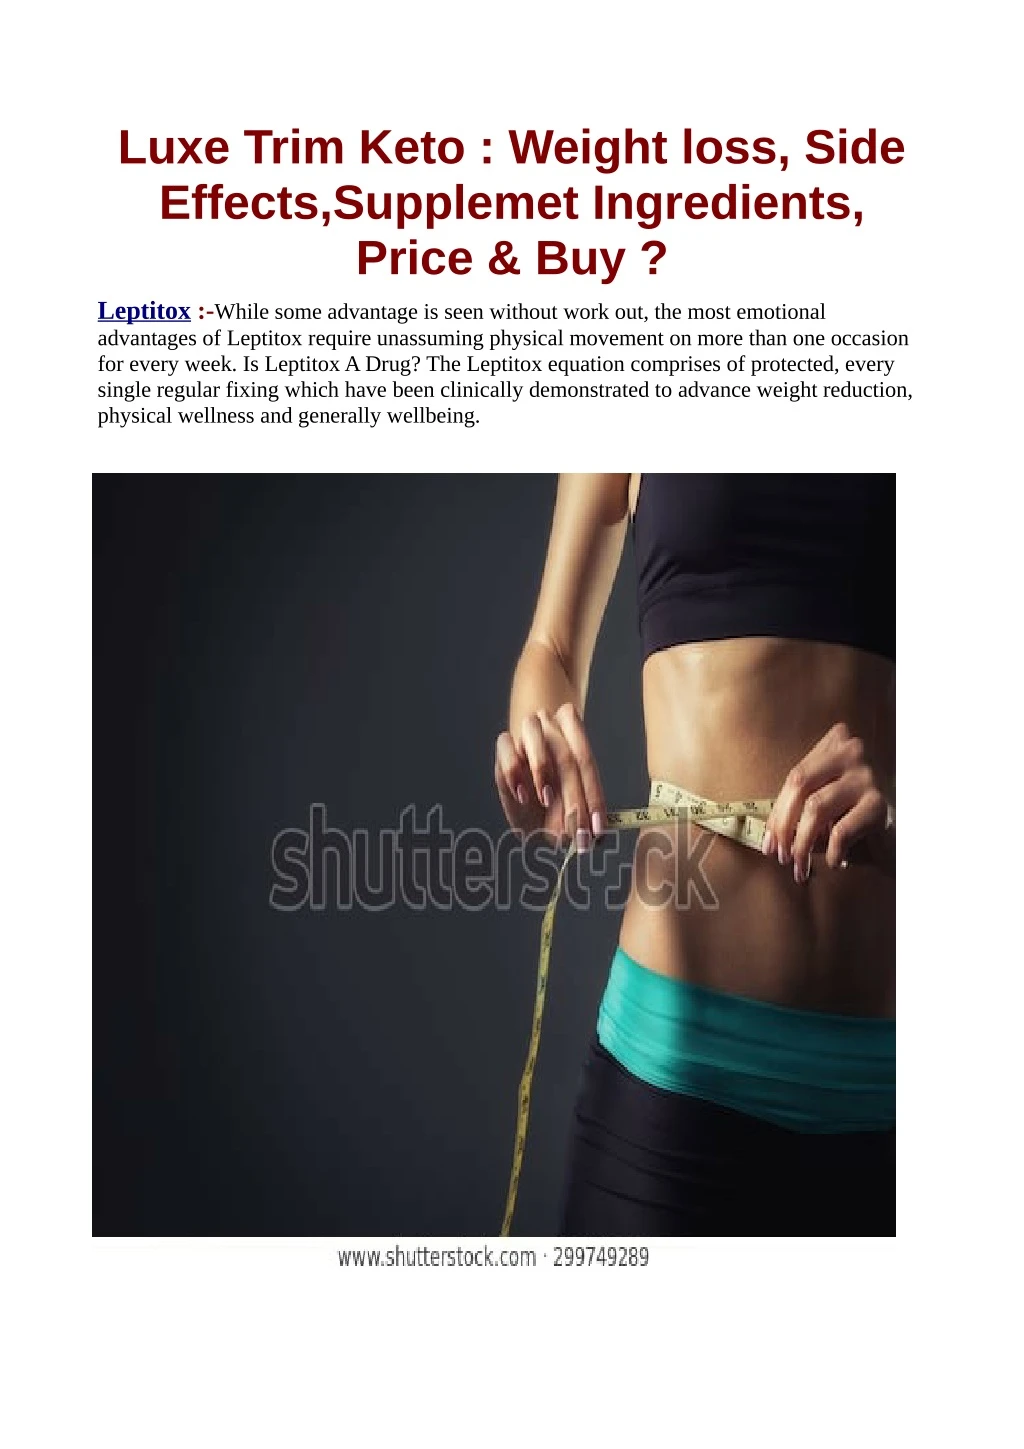 luxe trim keto weight loss side effects supplemet